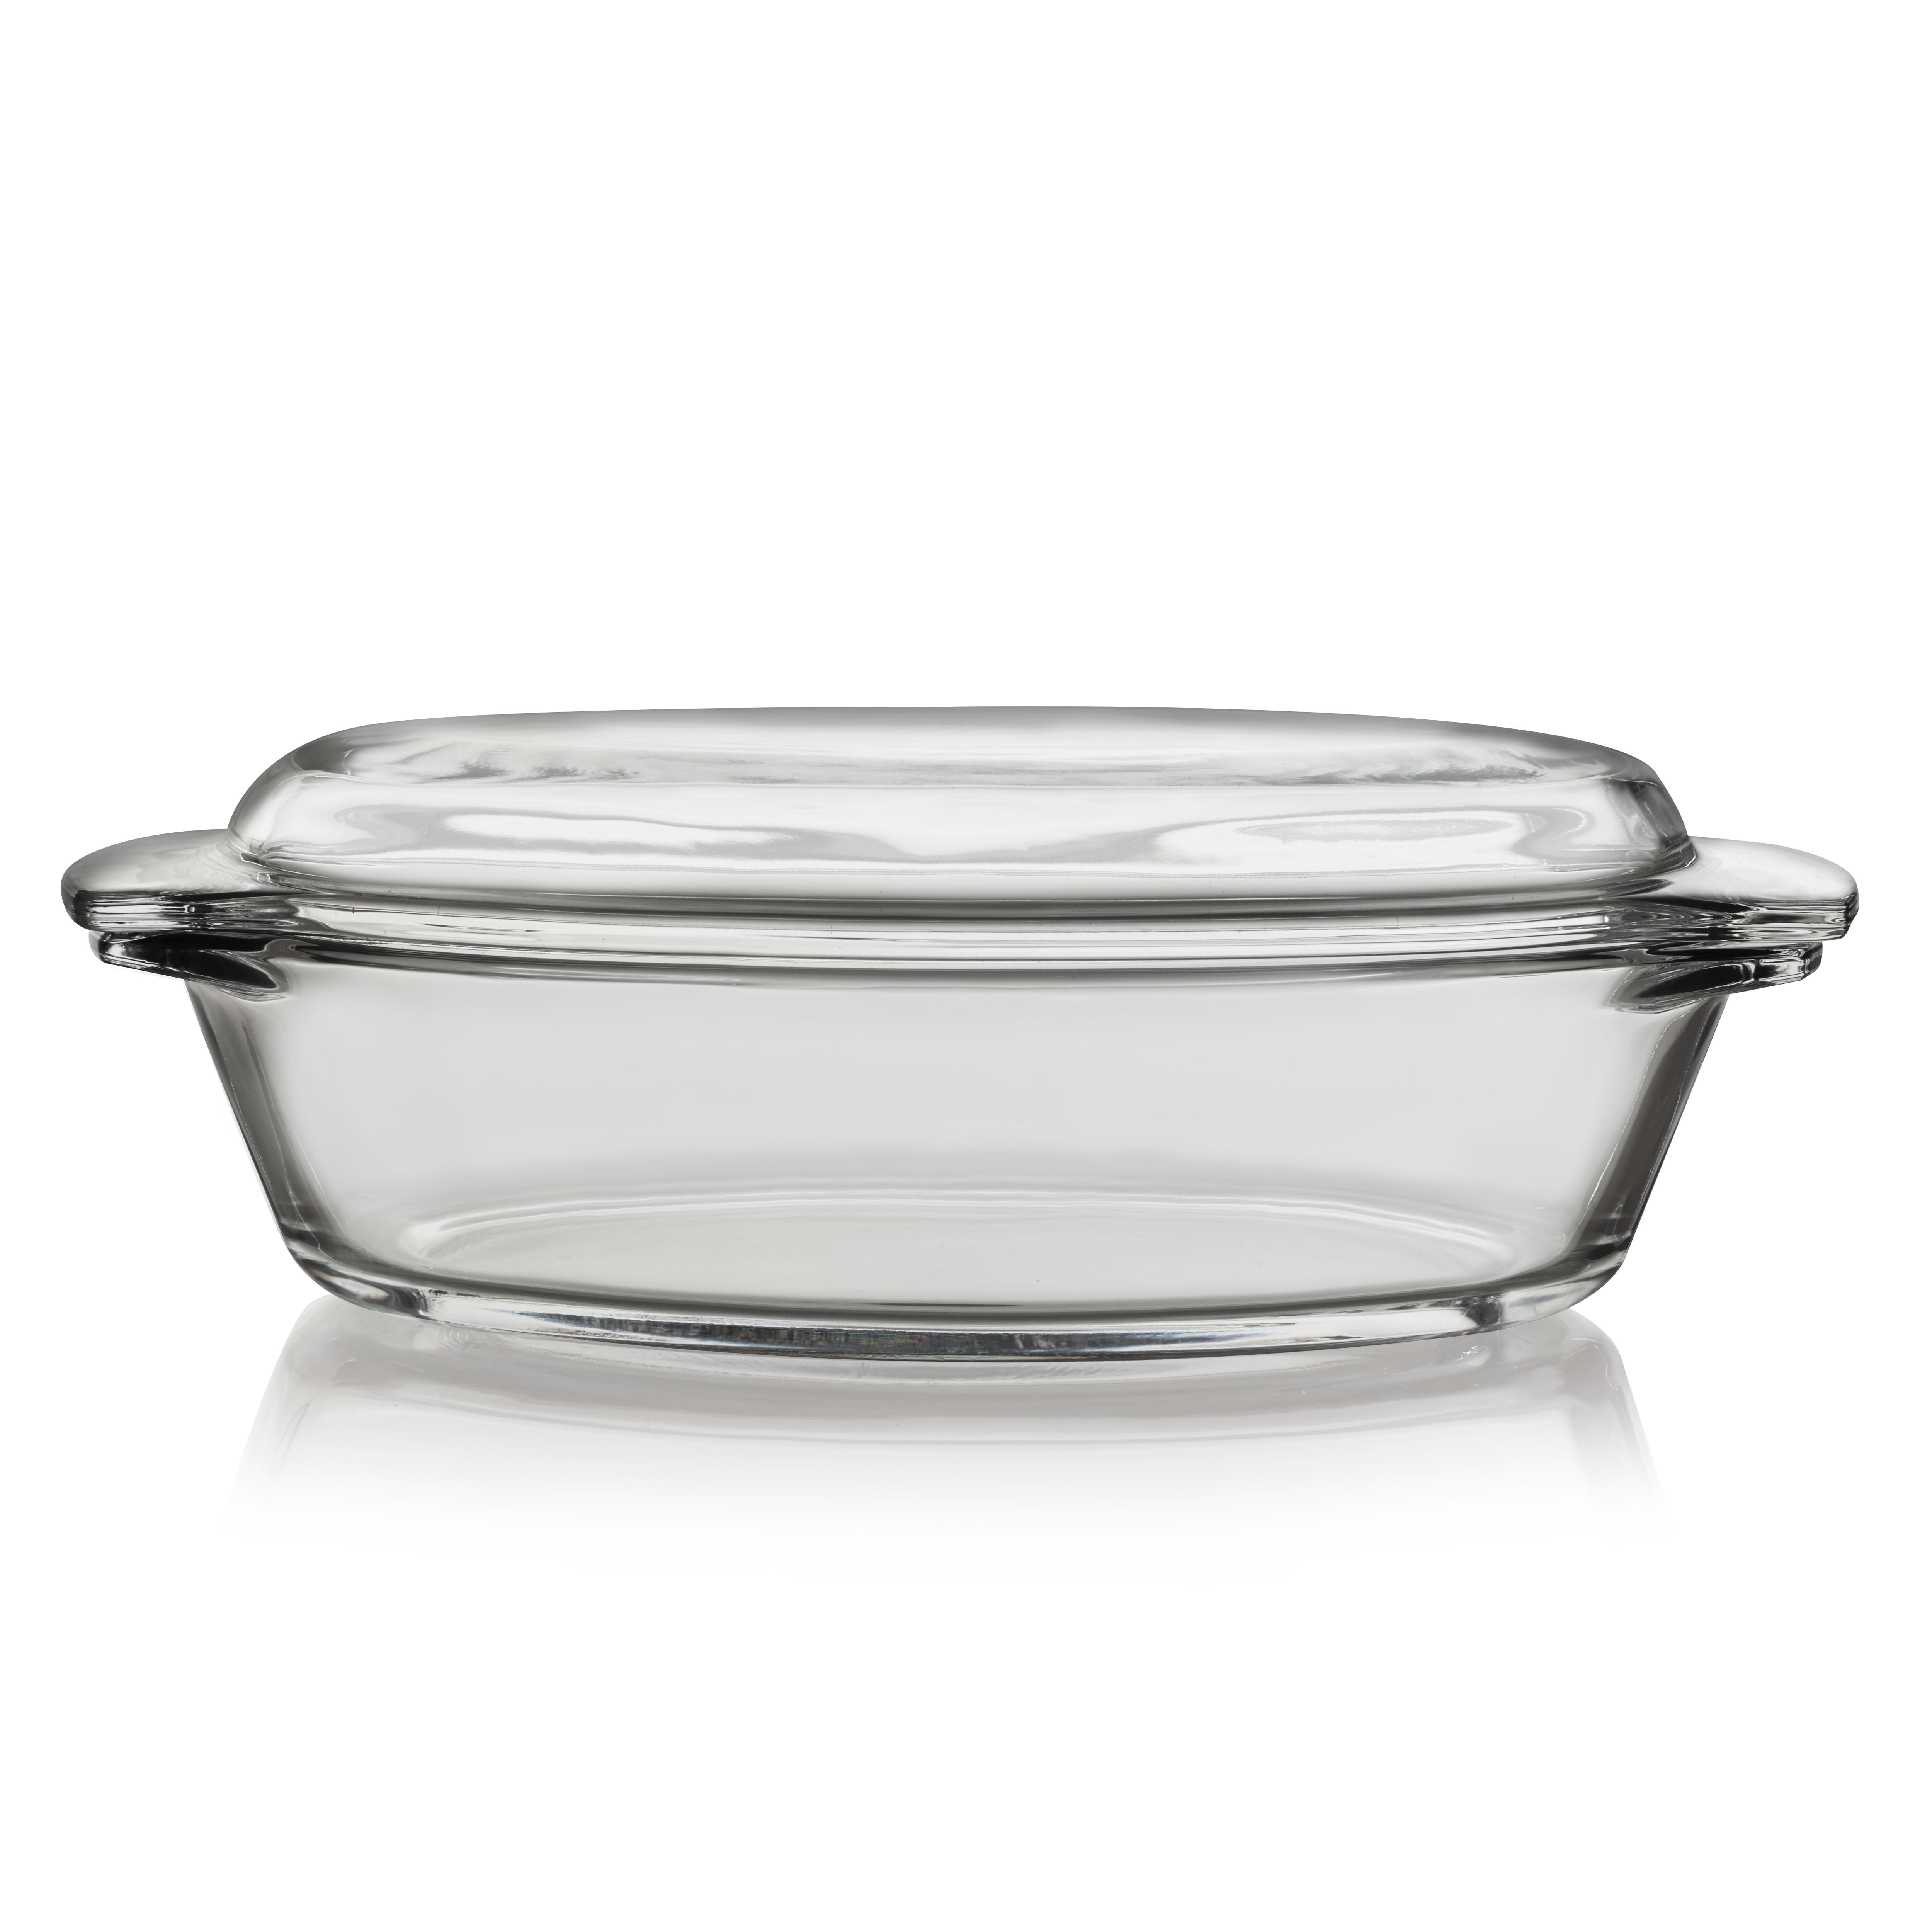 Flair 1.6-liter Casserole Dish with Lid